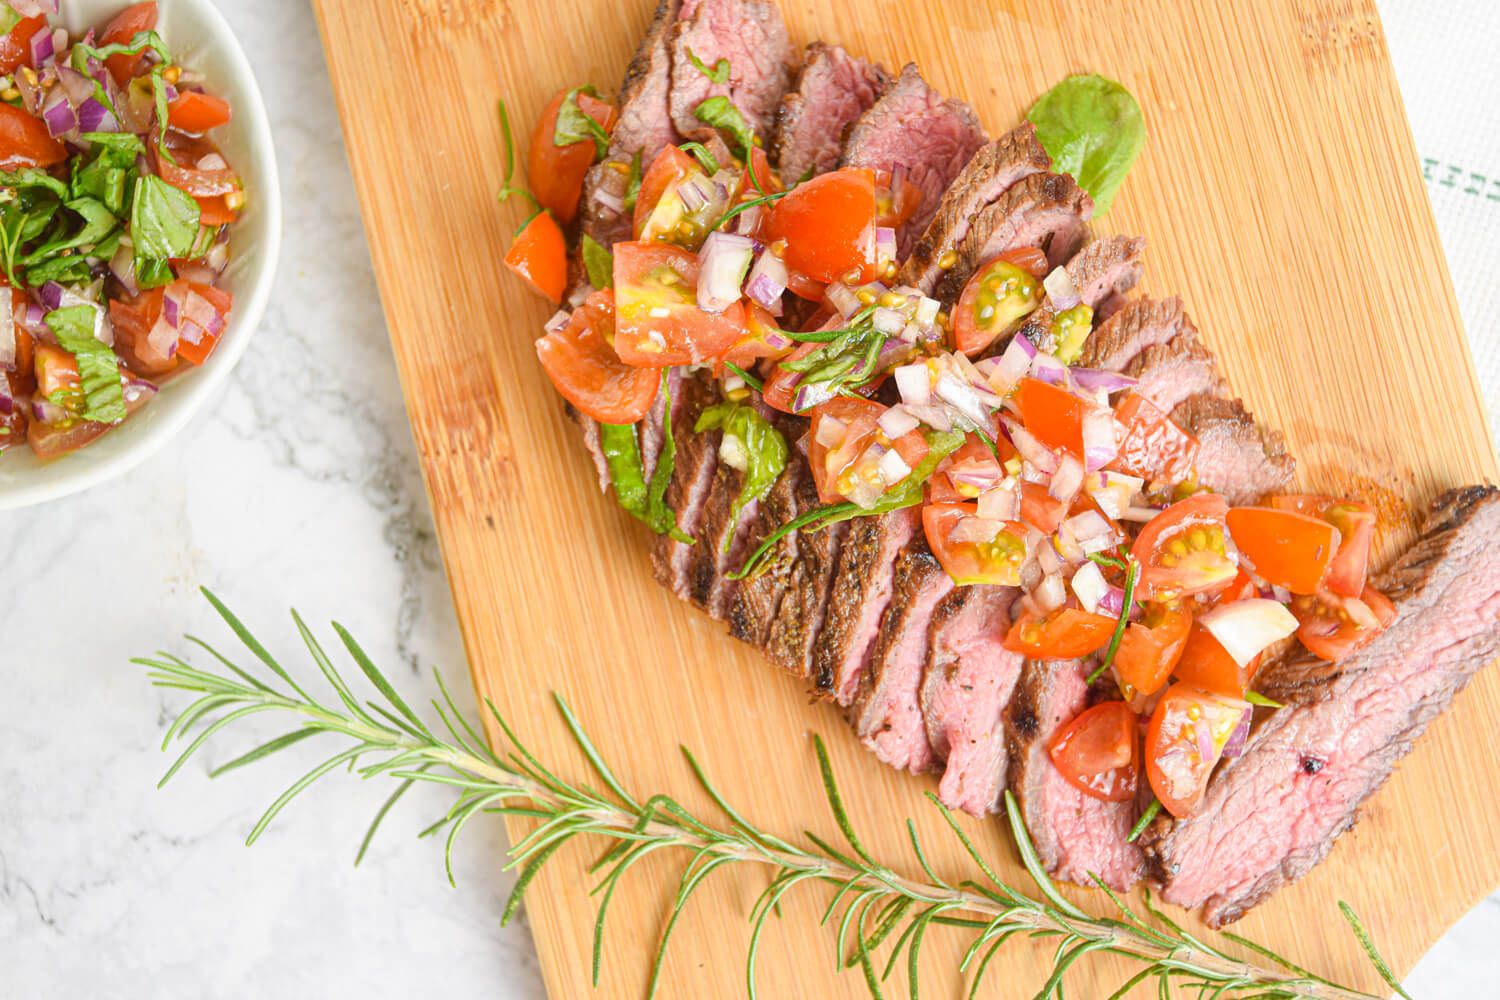 Spanish steak with tomato salad on a cutting board with rosemary.